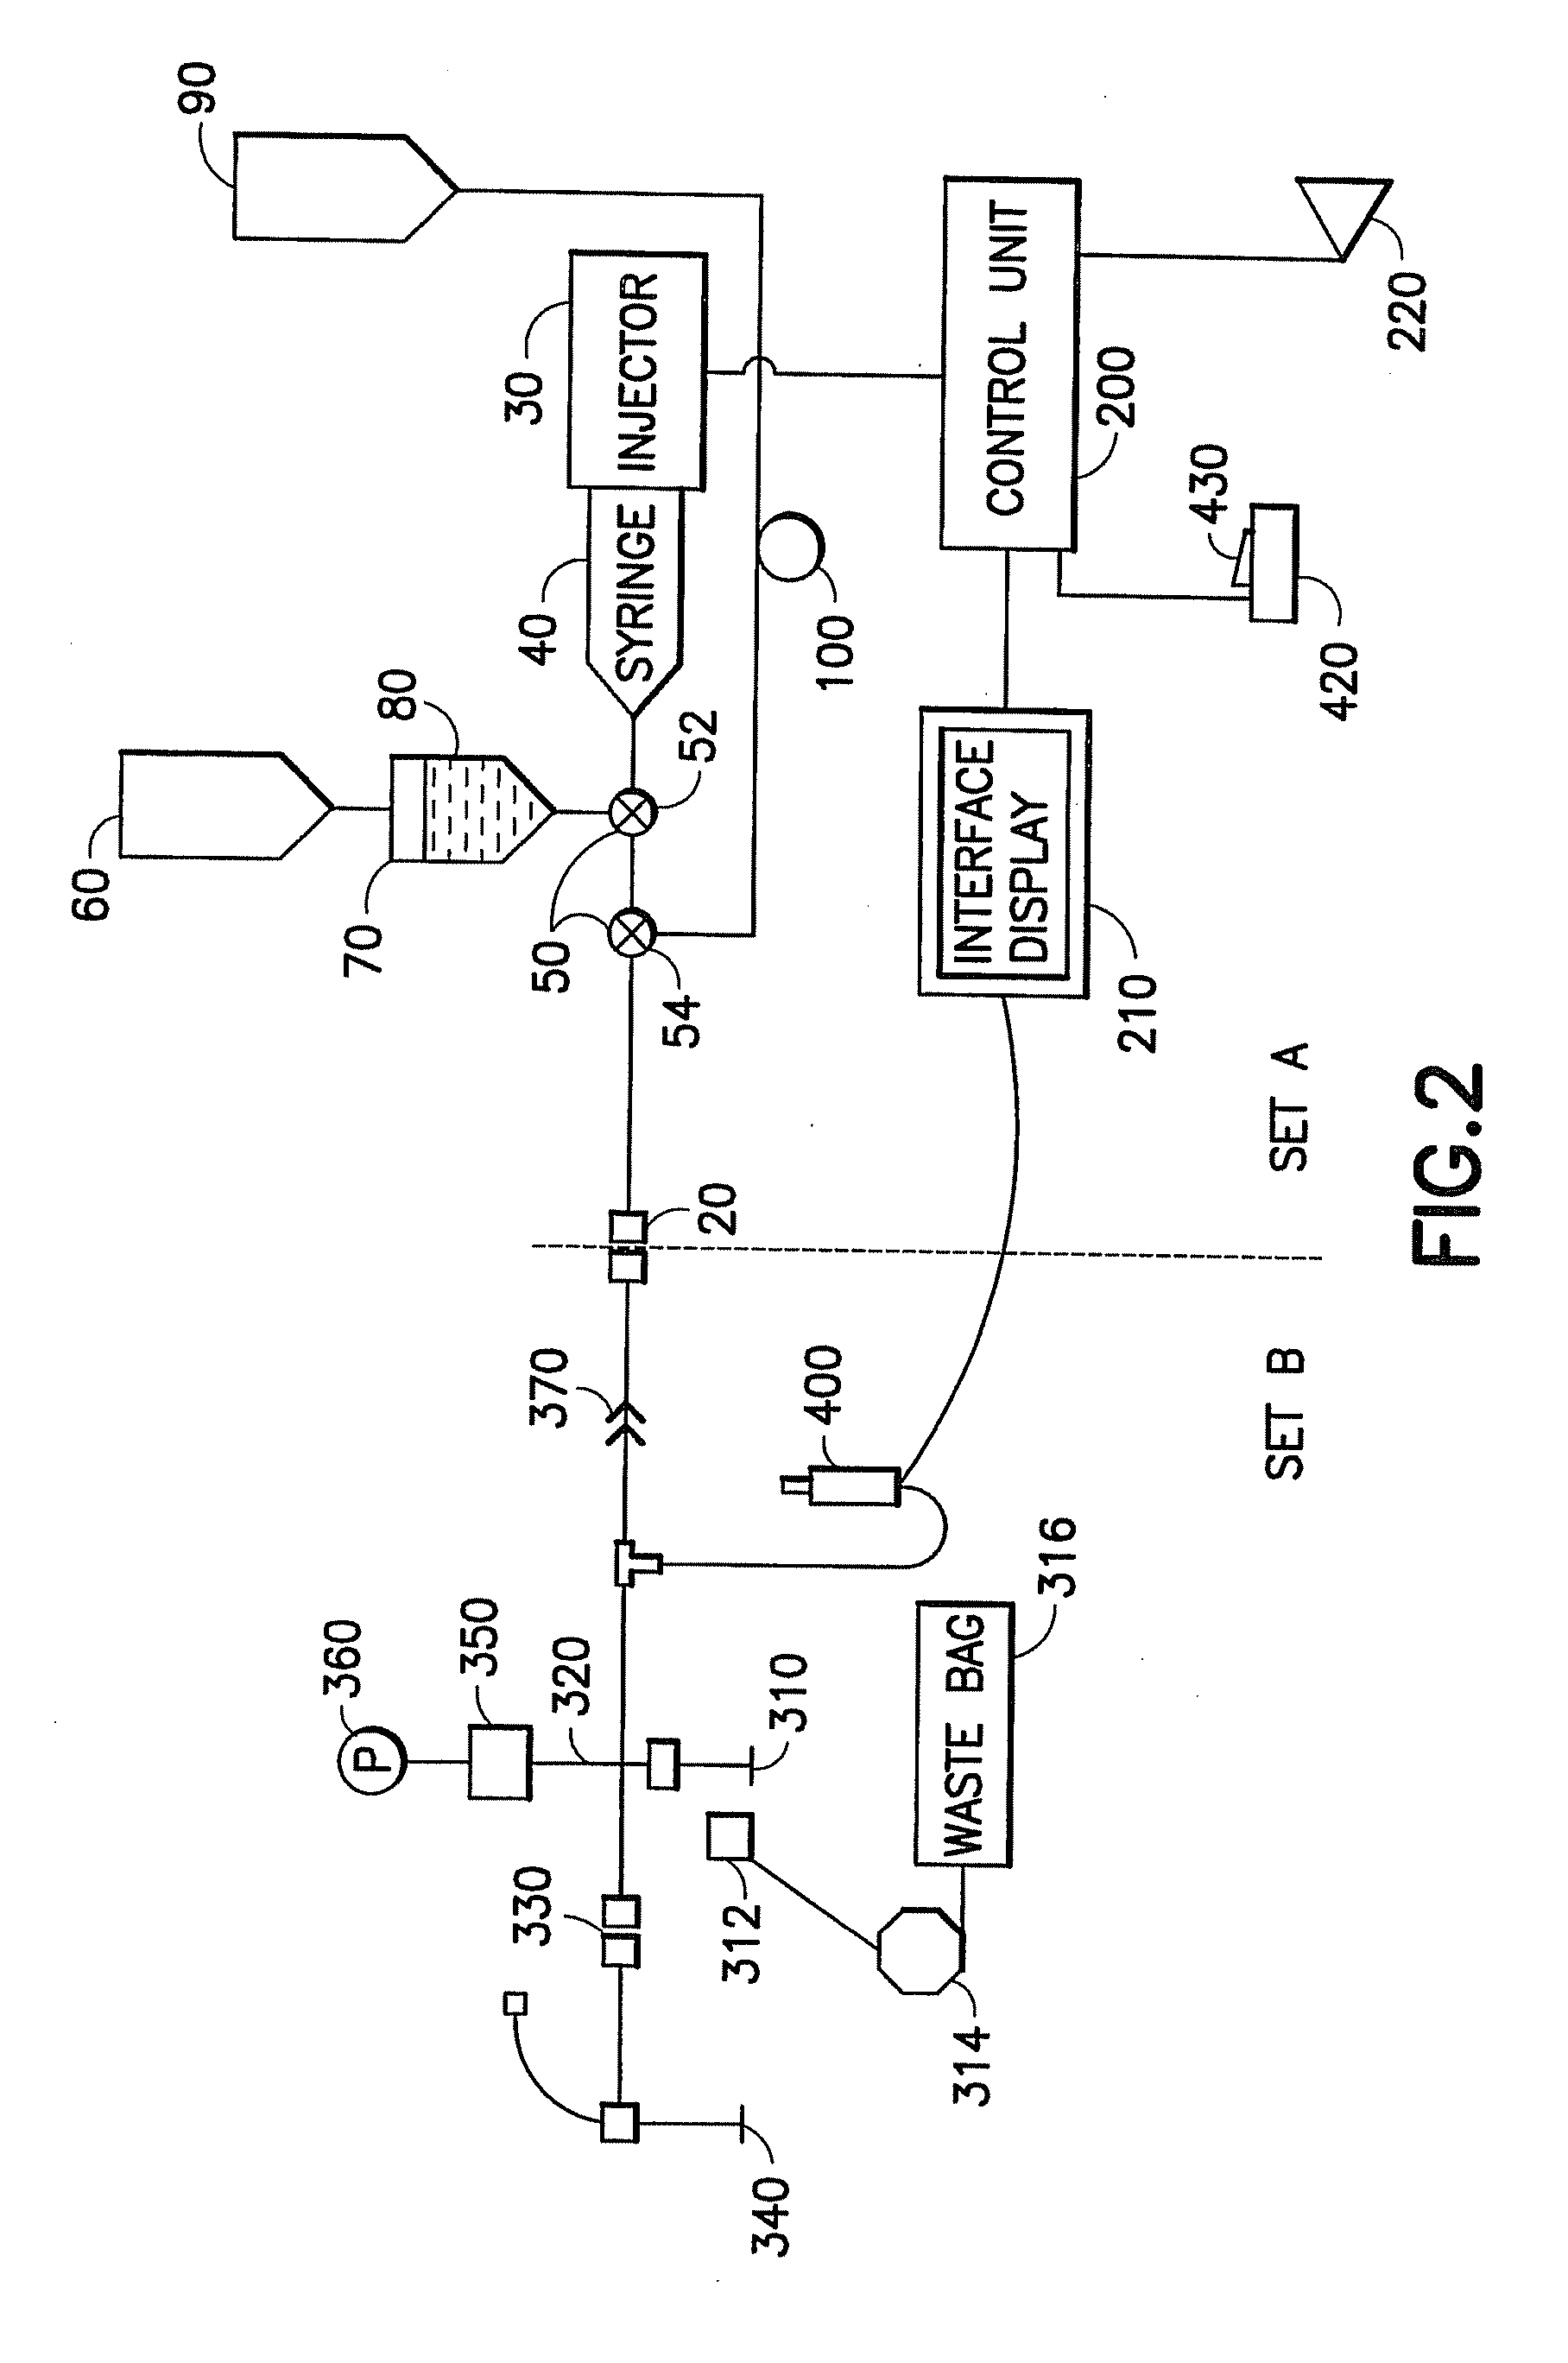 Fluid Delivery System, Fluid Path Set, and Pressure Isolation Mechanism with Hemodynamic Pressure Dampening Correction